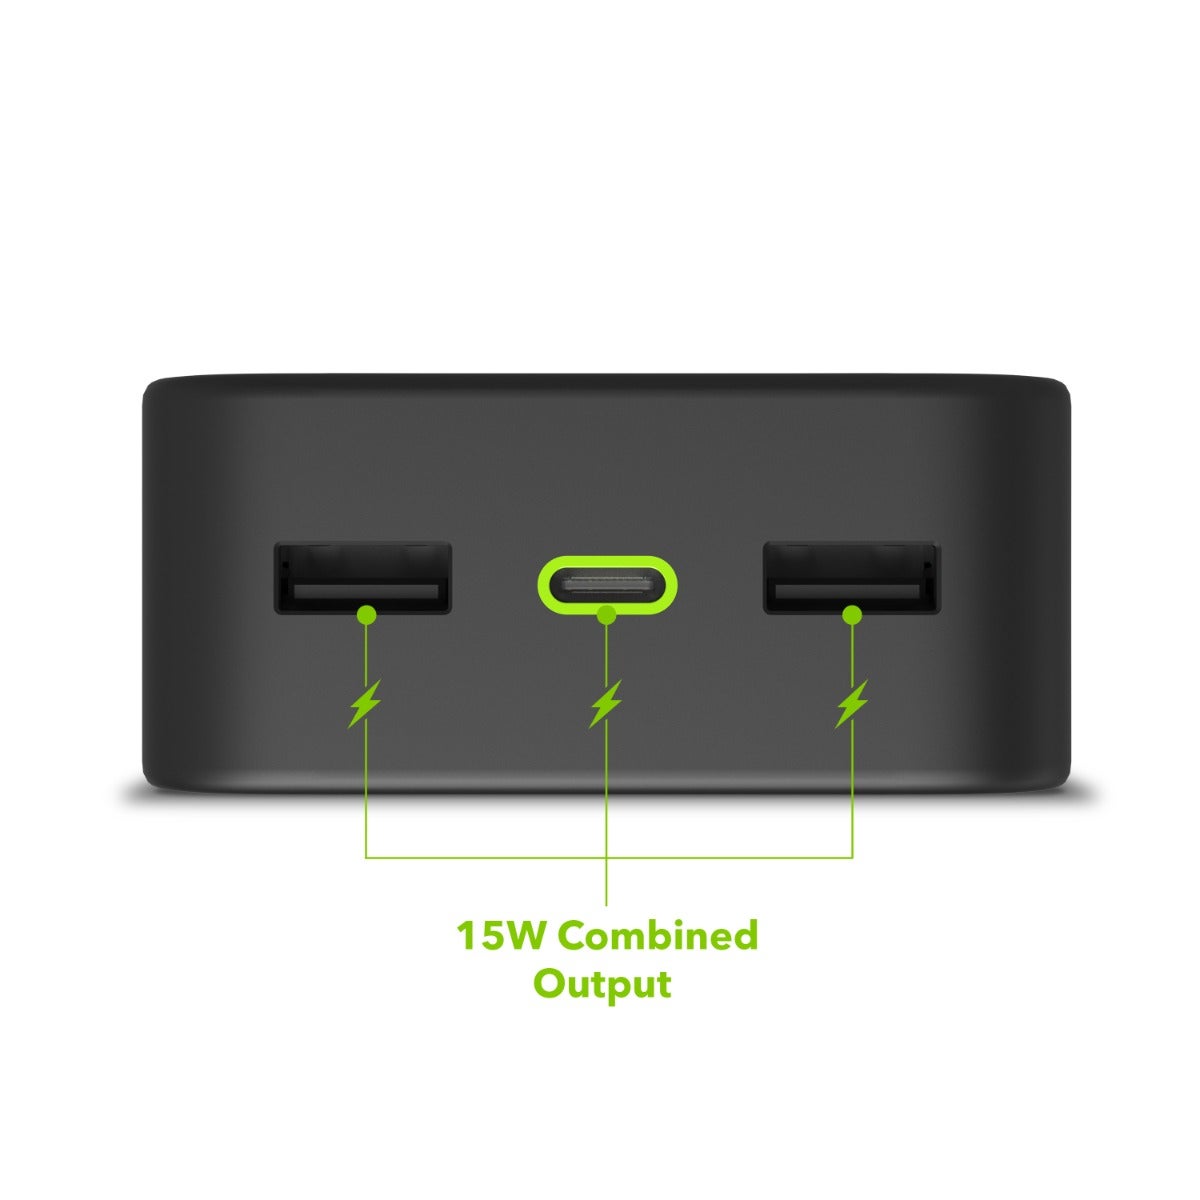 Up to 15W Combined Output
||Two USB-A ports and one USB-C port used simultaneously can provide a combined output of up to 15W. <sup>3</sup>